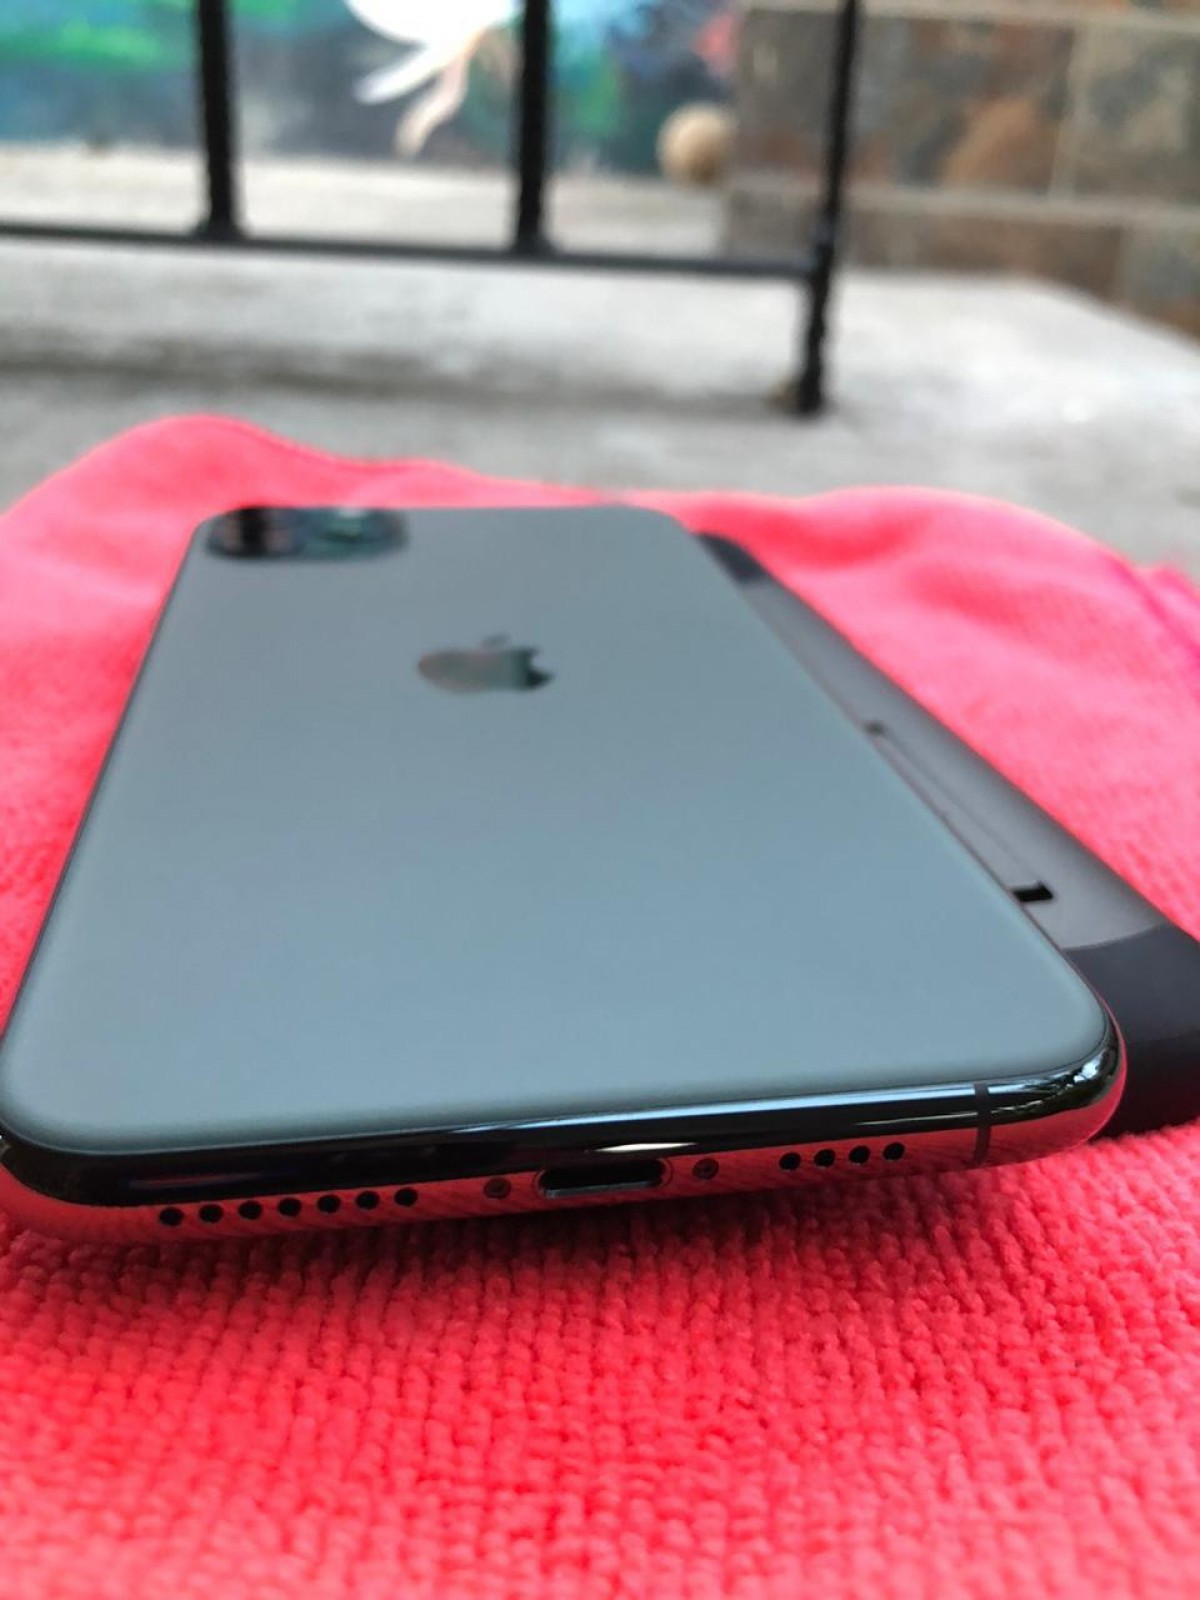 IPhone 11 Pro Max for sale in Mandeville Manchester - Phones